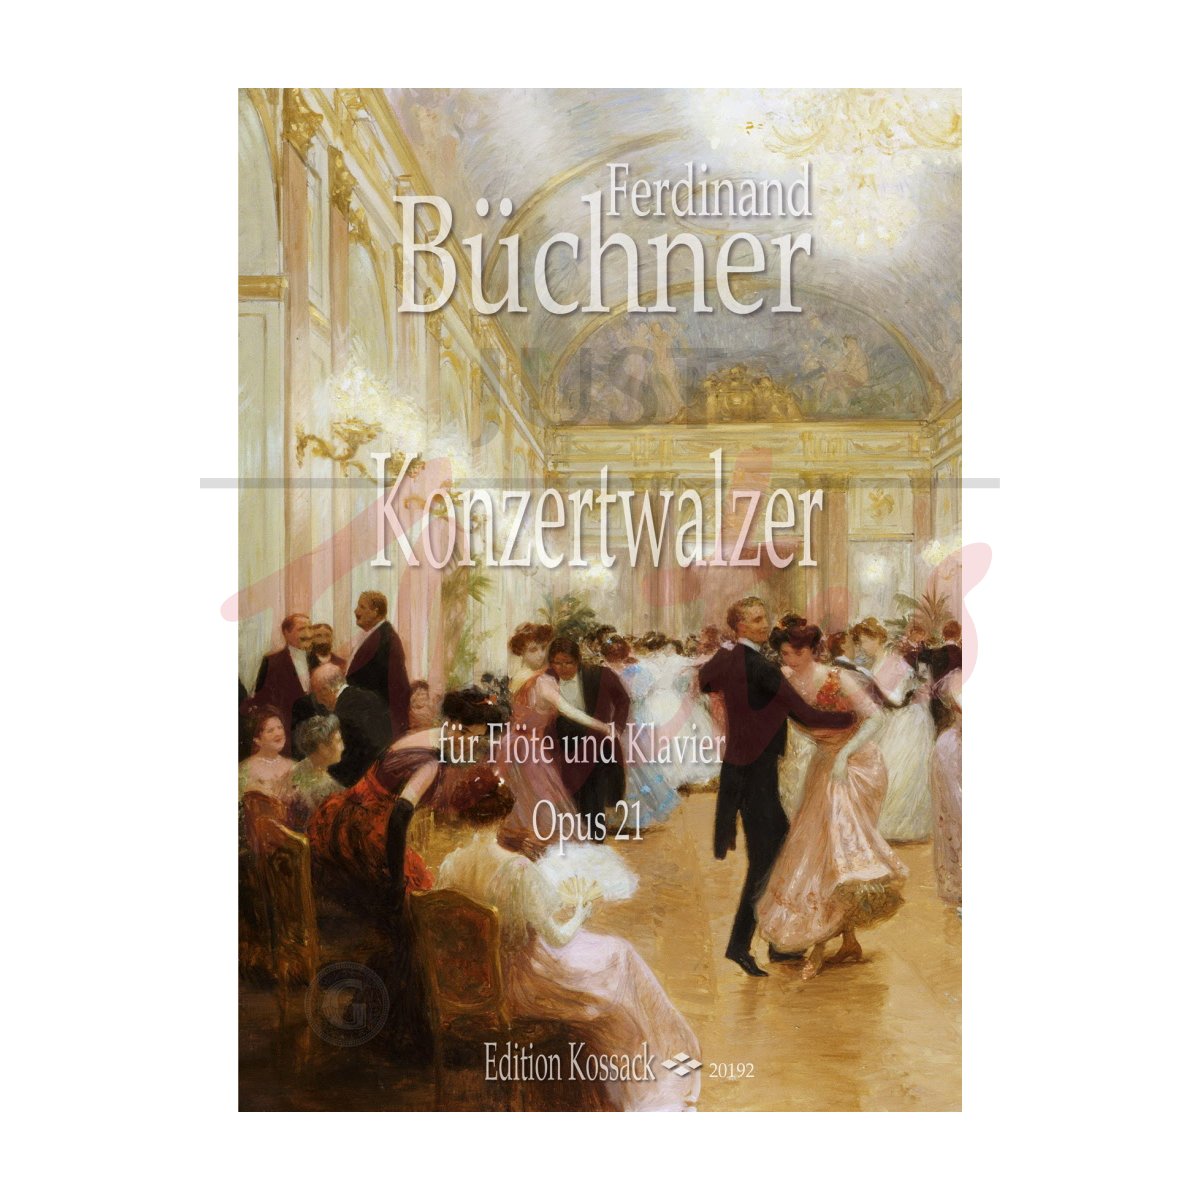 Konzertwalzer for Flute and Piano